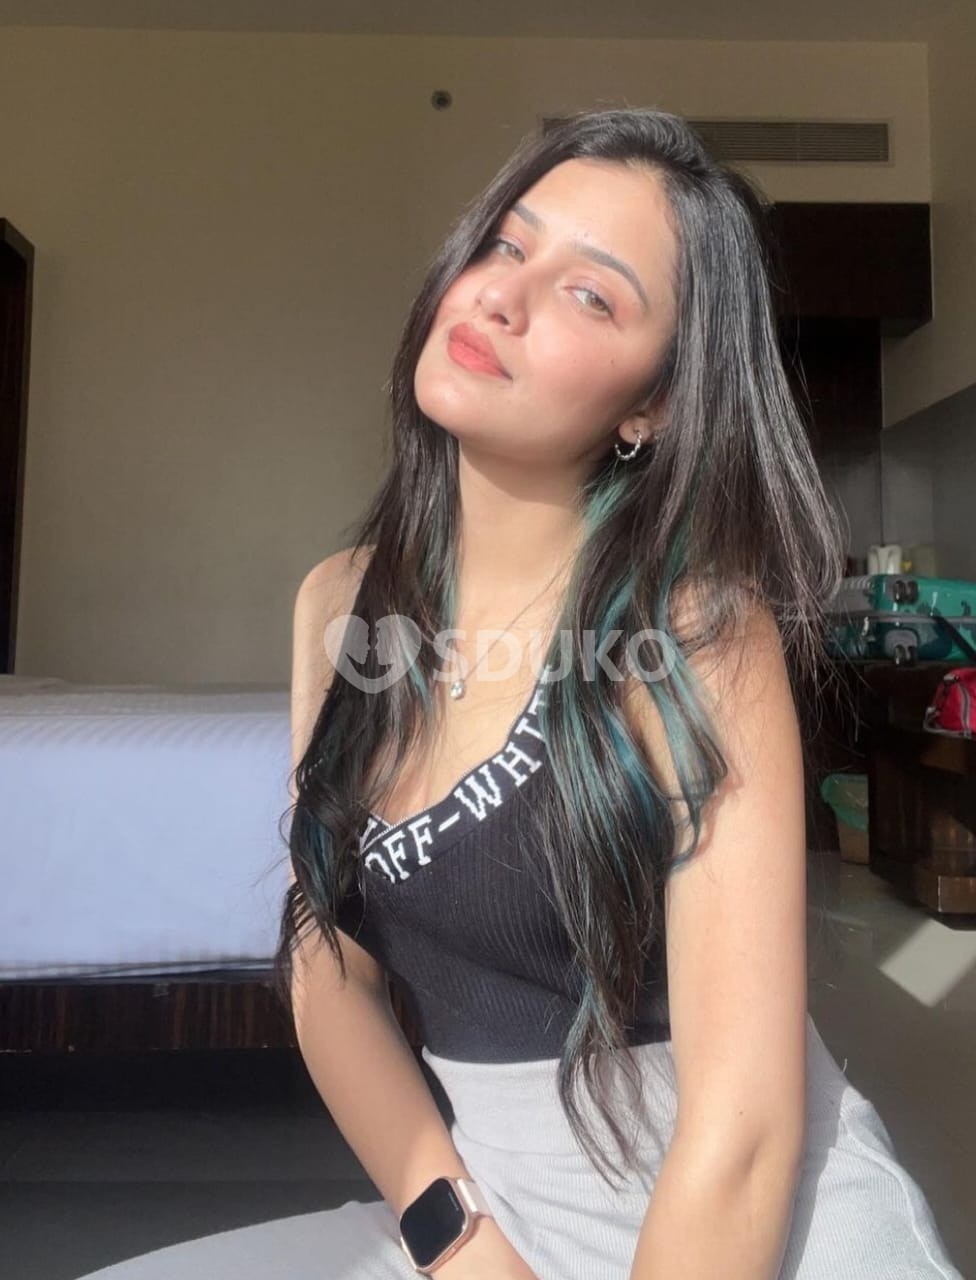 Malad ✅ 24x7 AFFORDABLE CHEAPEST RATE SAFE CALL GIRL SERVICE AVAILABLE OUTCALL AVAILABLE.... ....